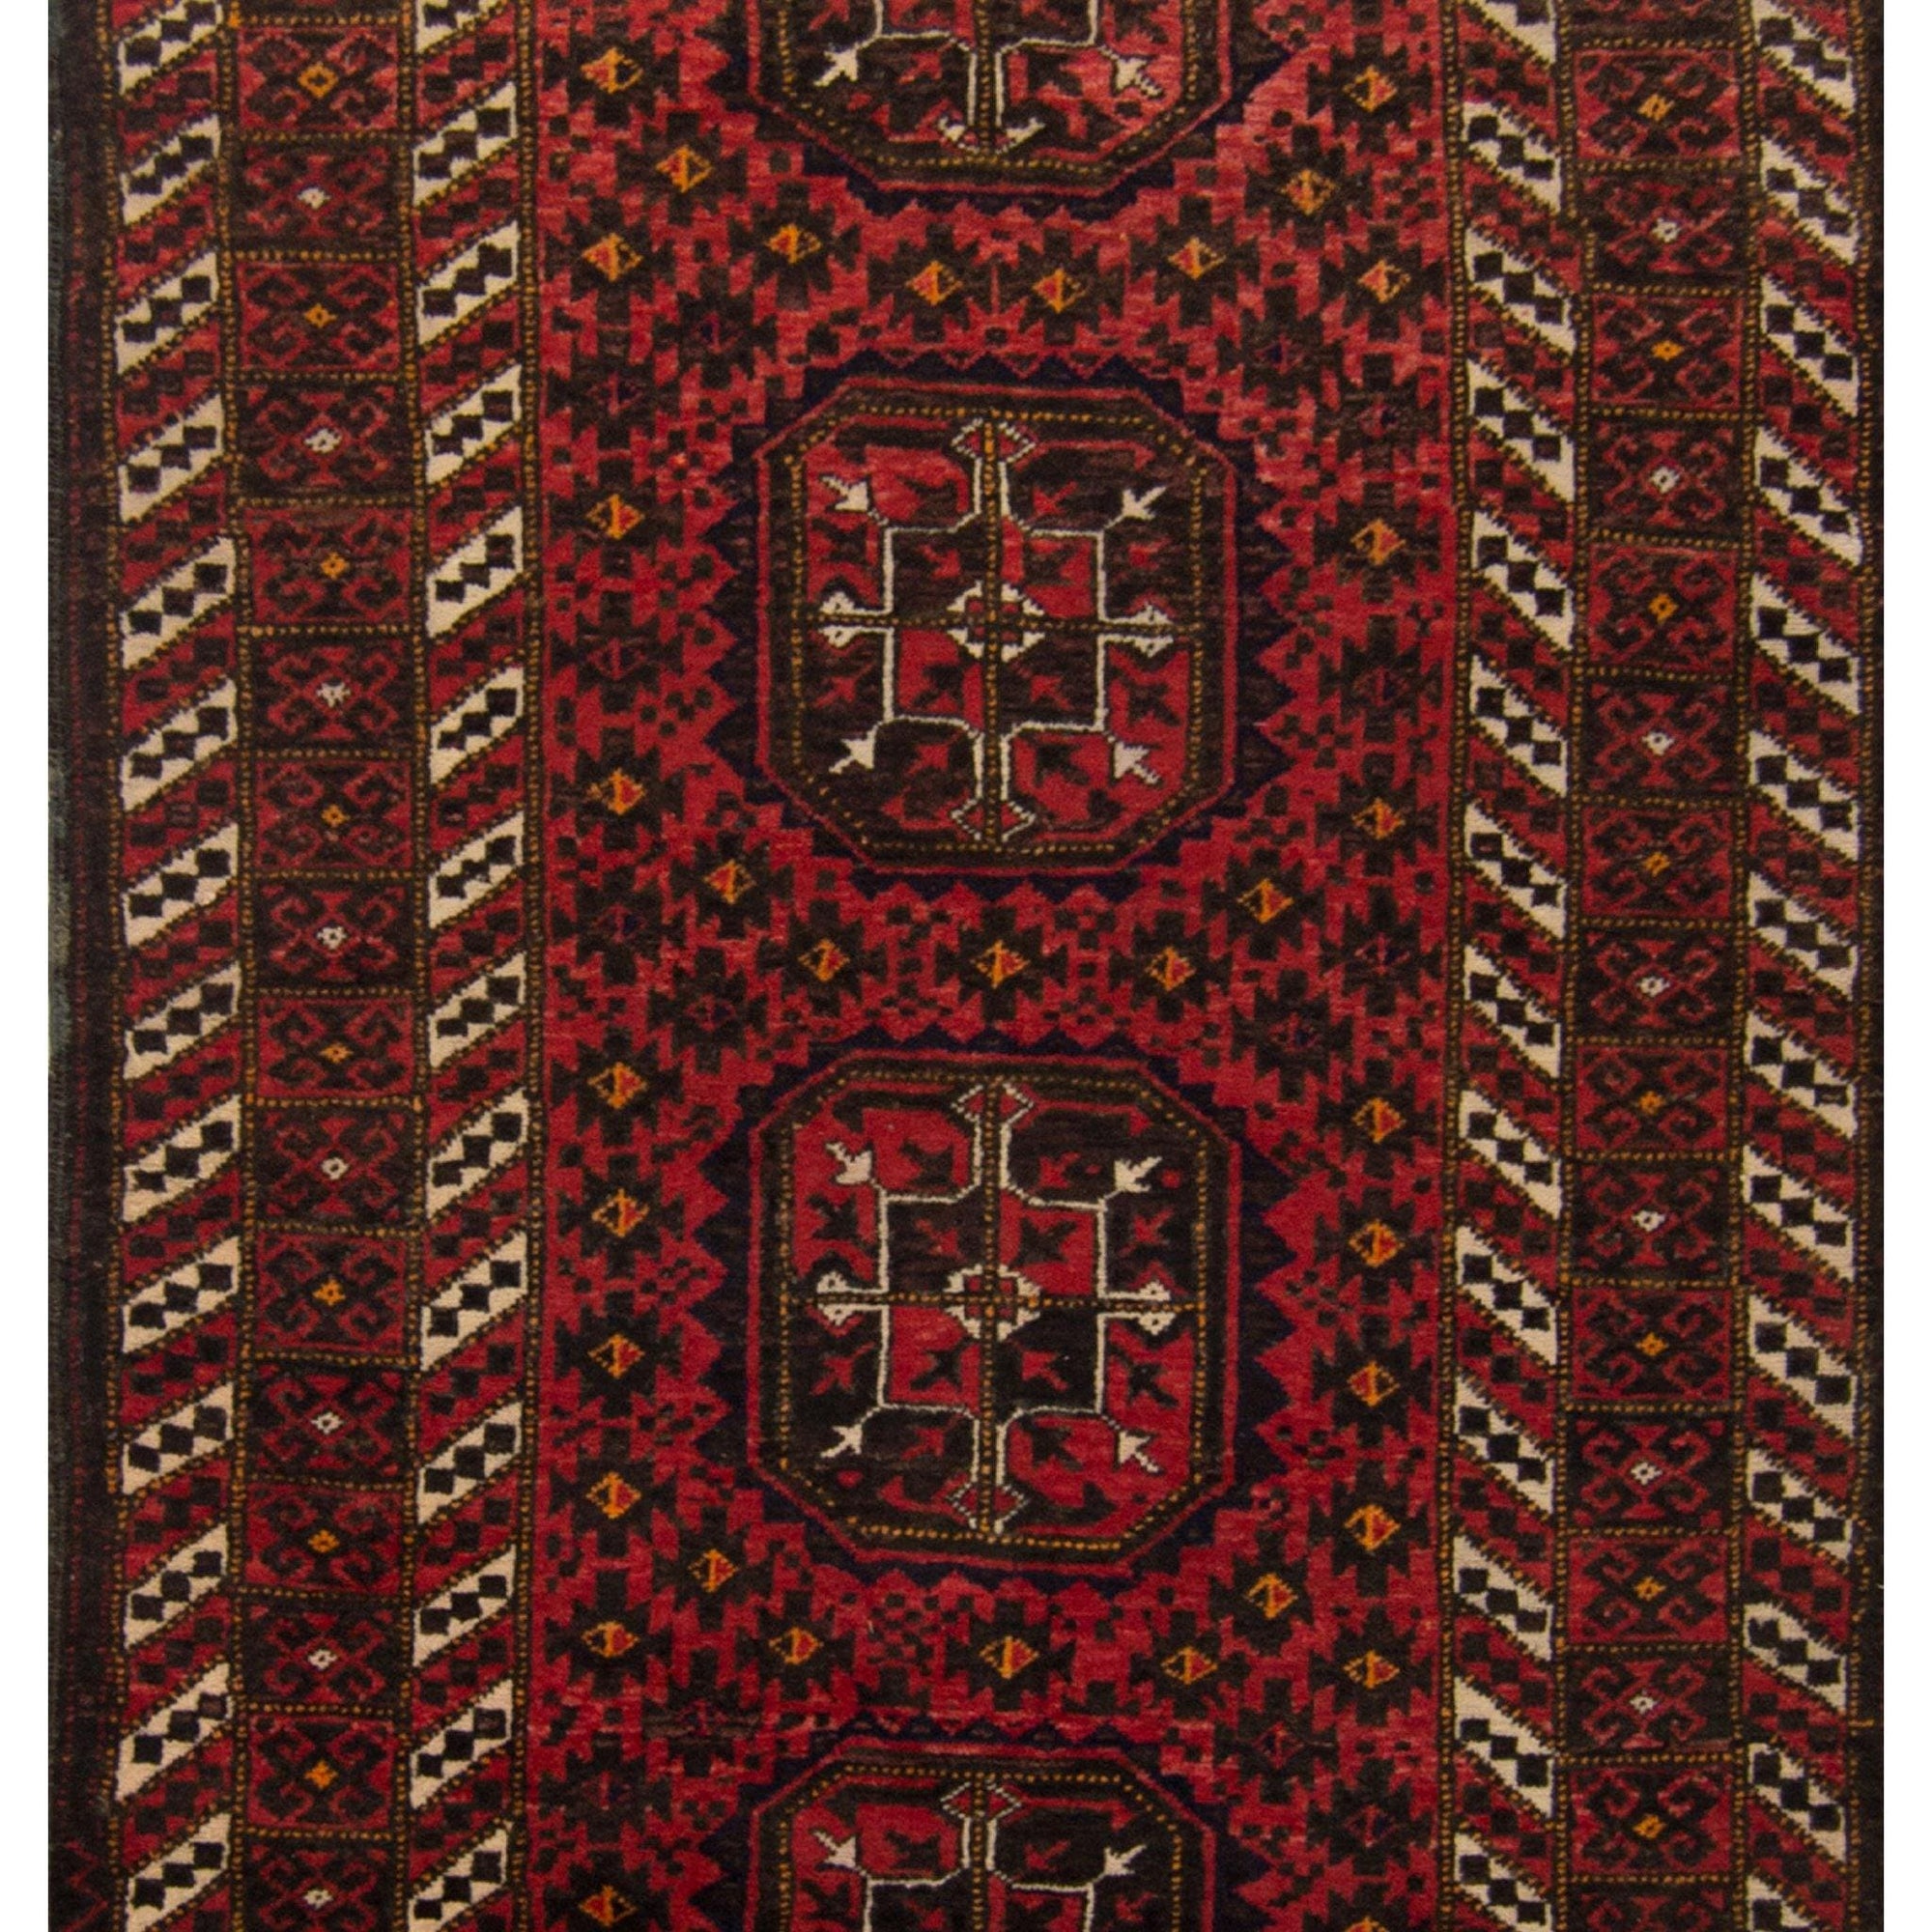 Fine Hand-knotted Wool Baluchi Persian Rug 102cm x 193cm